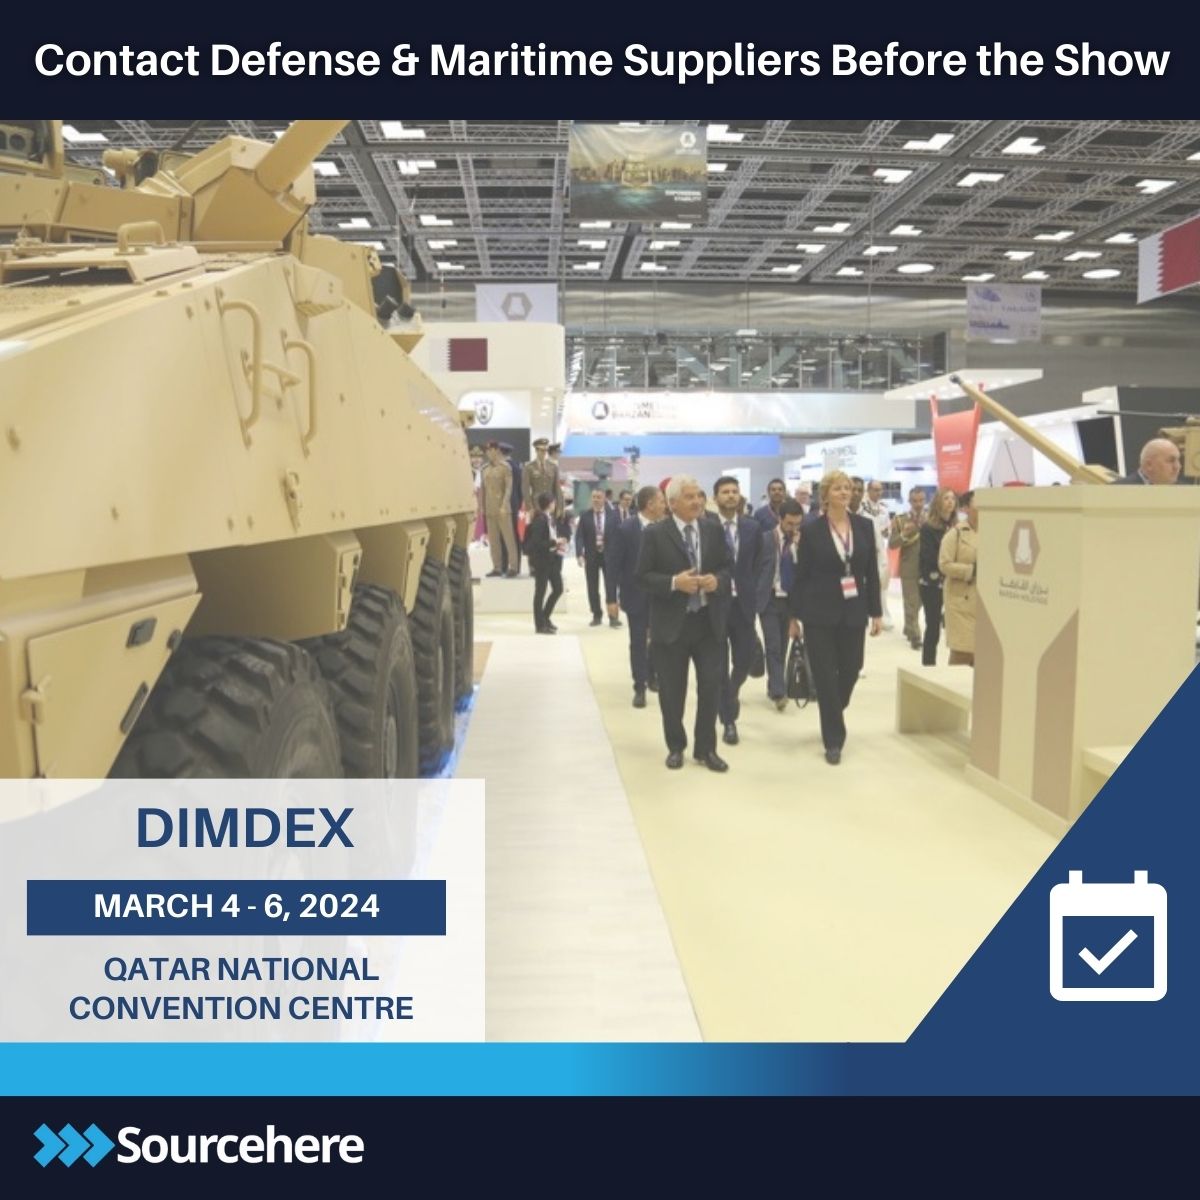 🌟@DIMDEXQatar is allready underway, and our partner @Kallman is hosting the #USAPartnershipPavilion. If you are not attending the event, sign up on @source_here to get exclusive access to exhibitor and product information from anywhere in the world. #DIMDEX #DefenseIndustry